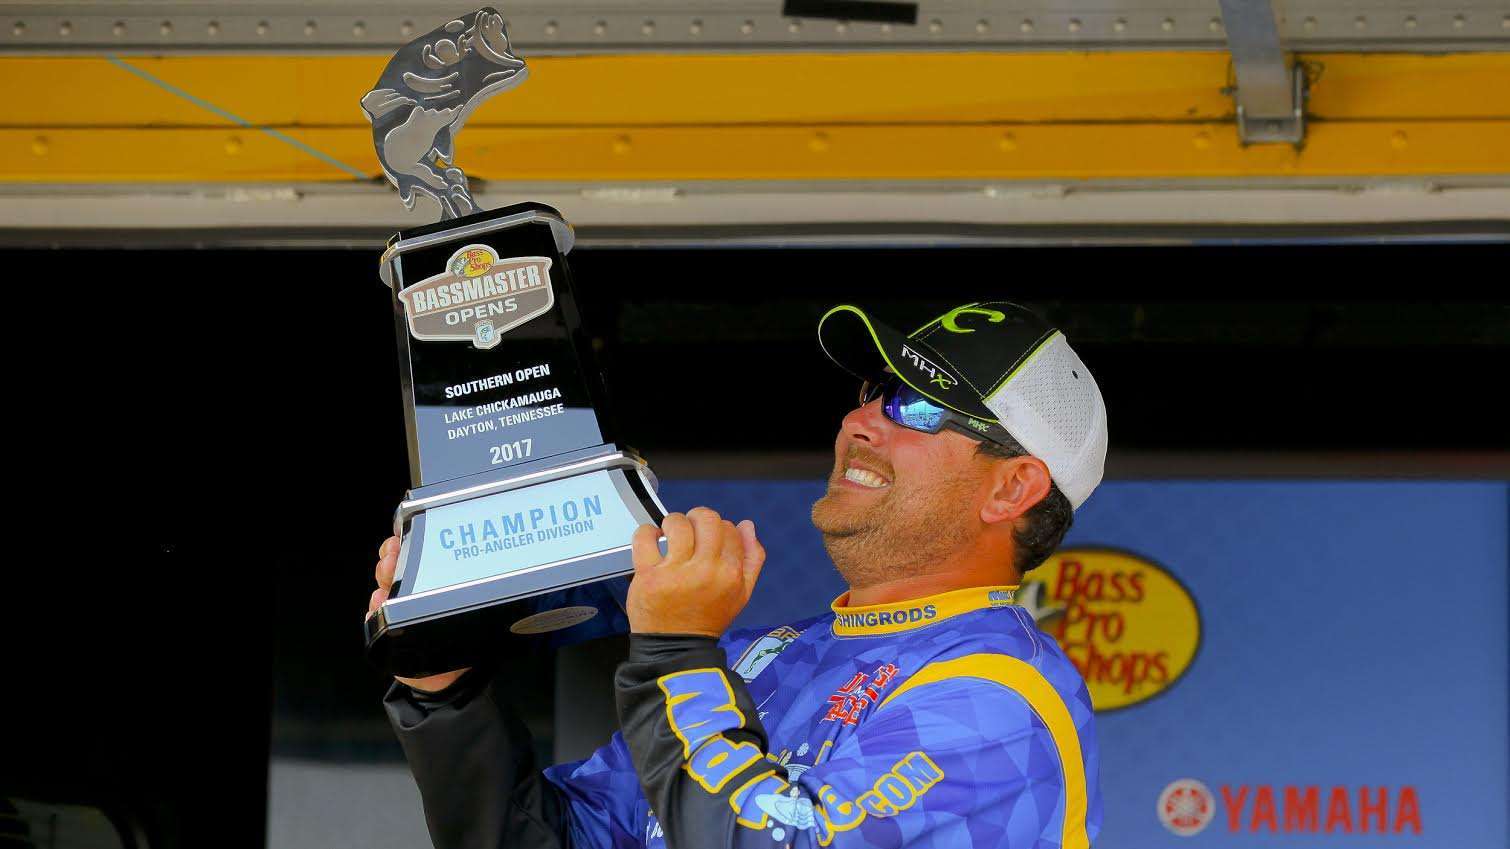 When the Bassmaster Opens visited Chickamauga during the 2017 season, John Cox took the pro-side win with a total weight of 68 pounds, 3 ounces.
